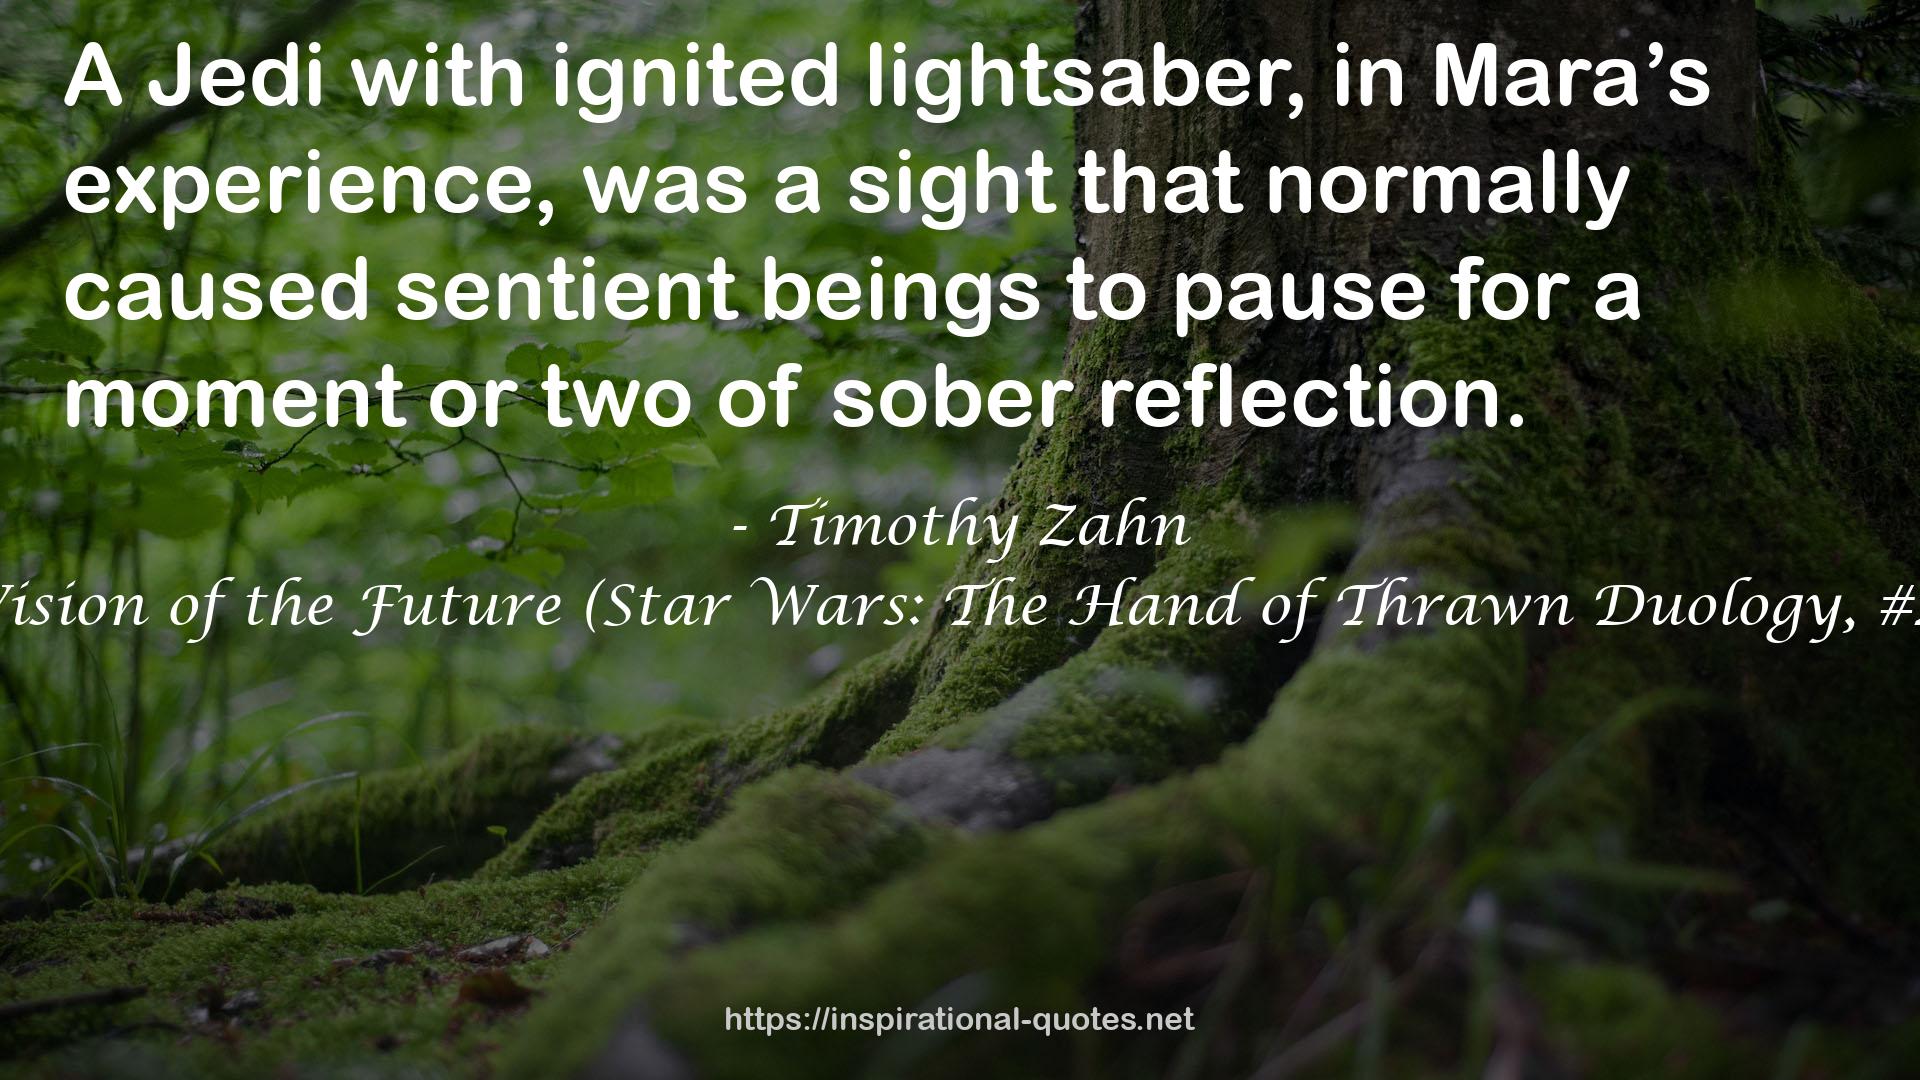 Timothy Zahn QUOTES